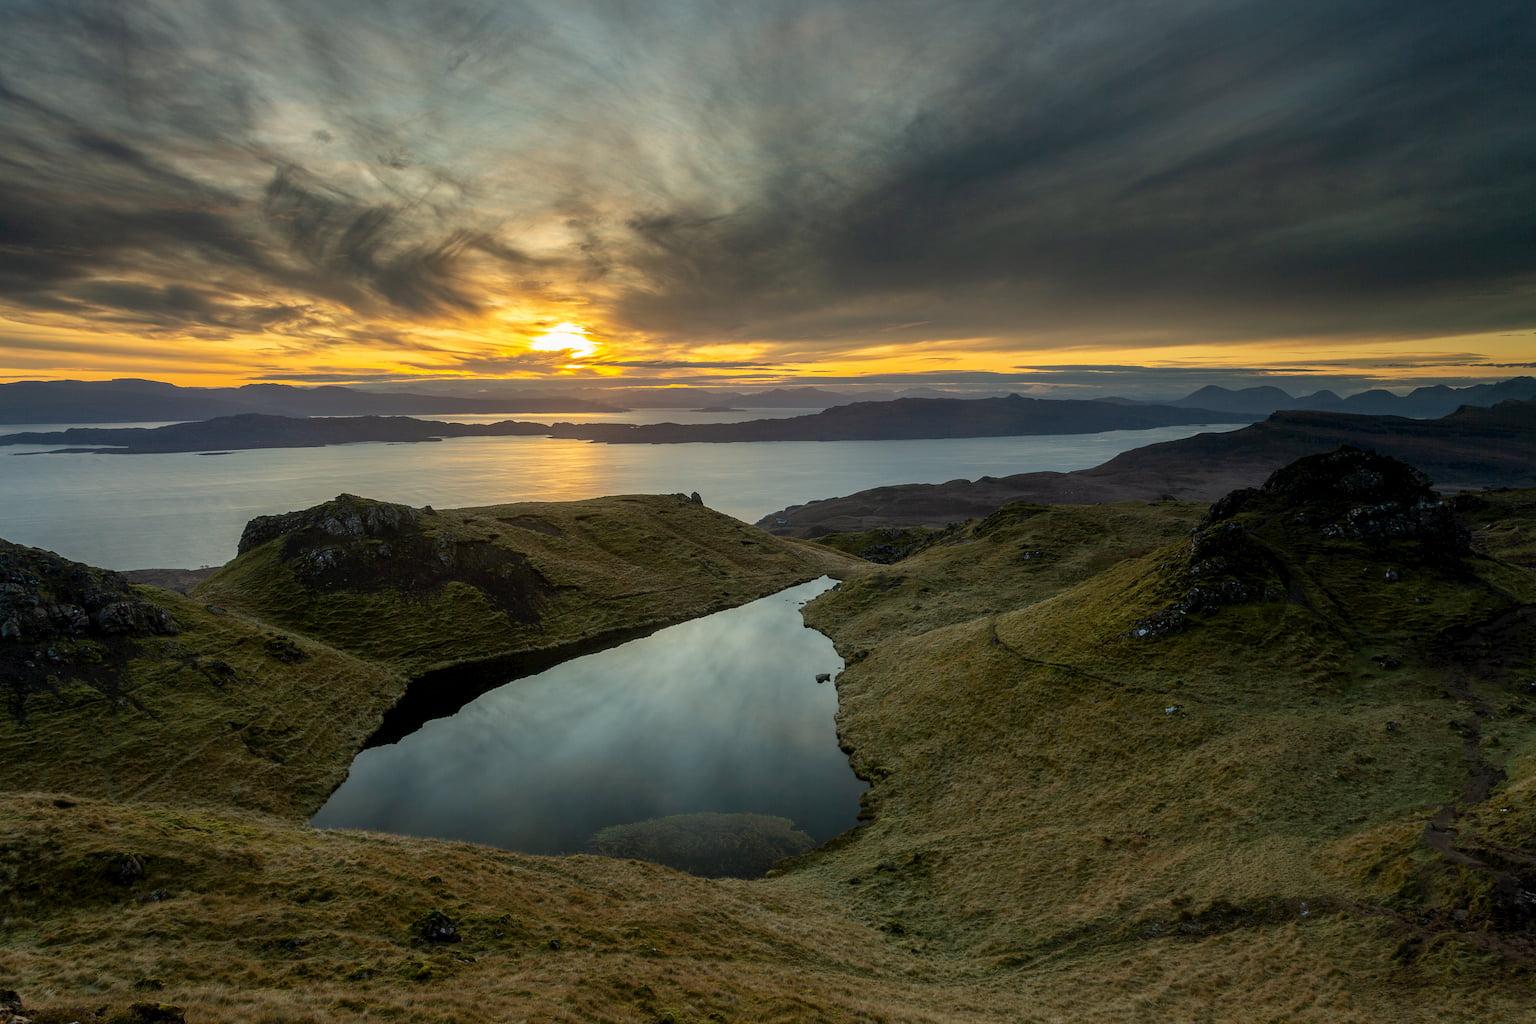 Sunrise over the mainland of Scotland. Photograph taken from the Old Man of Storr on the Isle of Skye